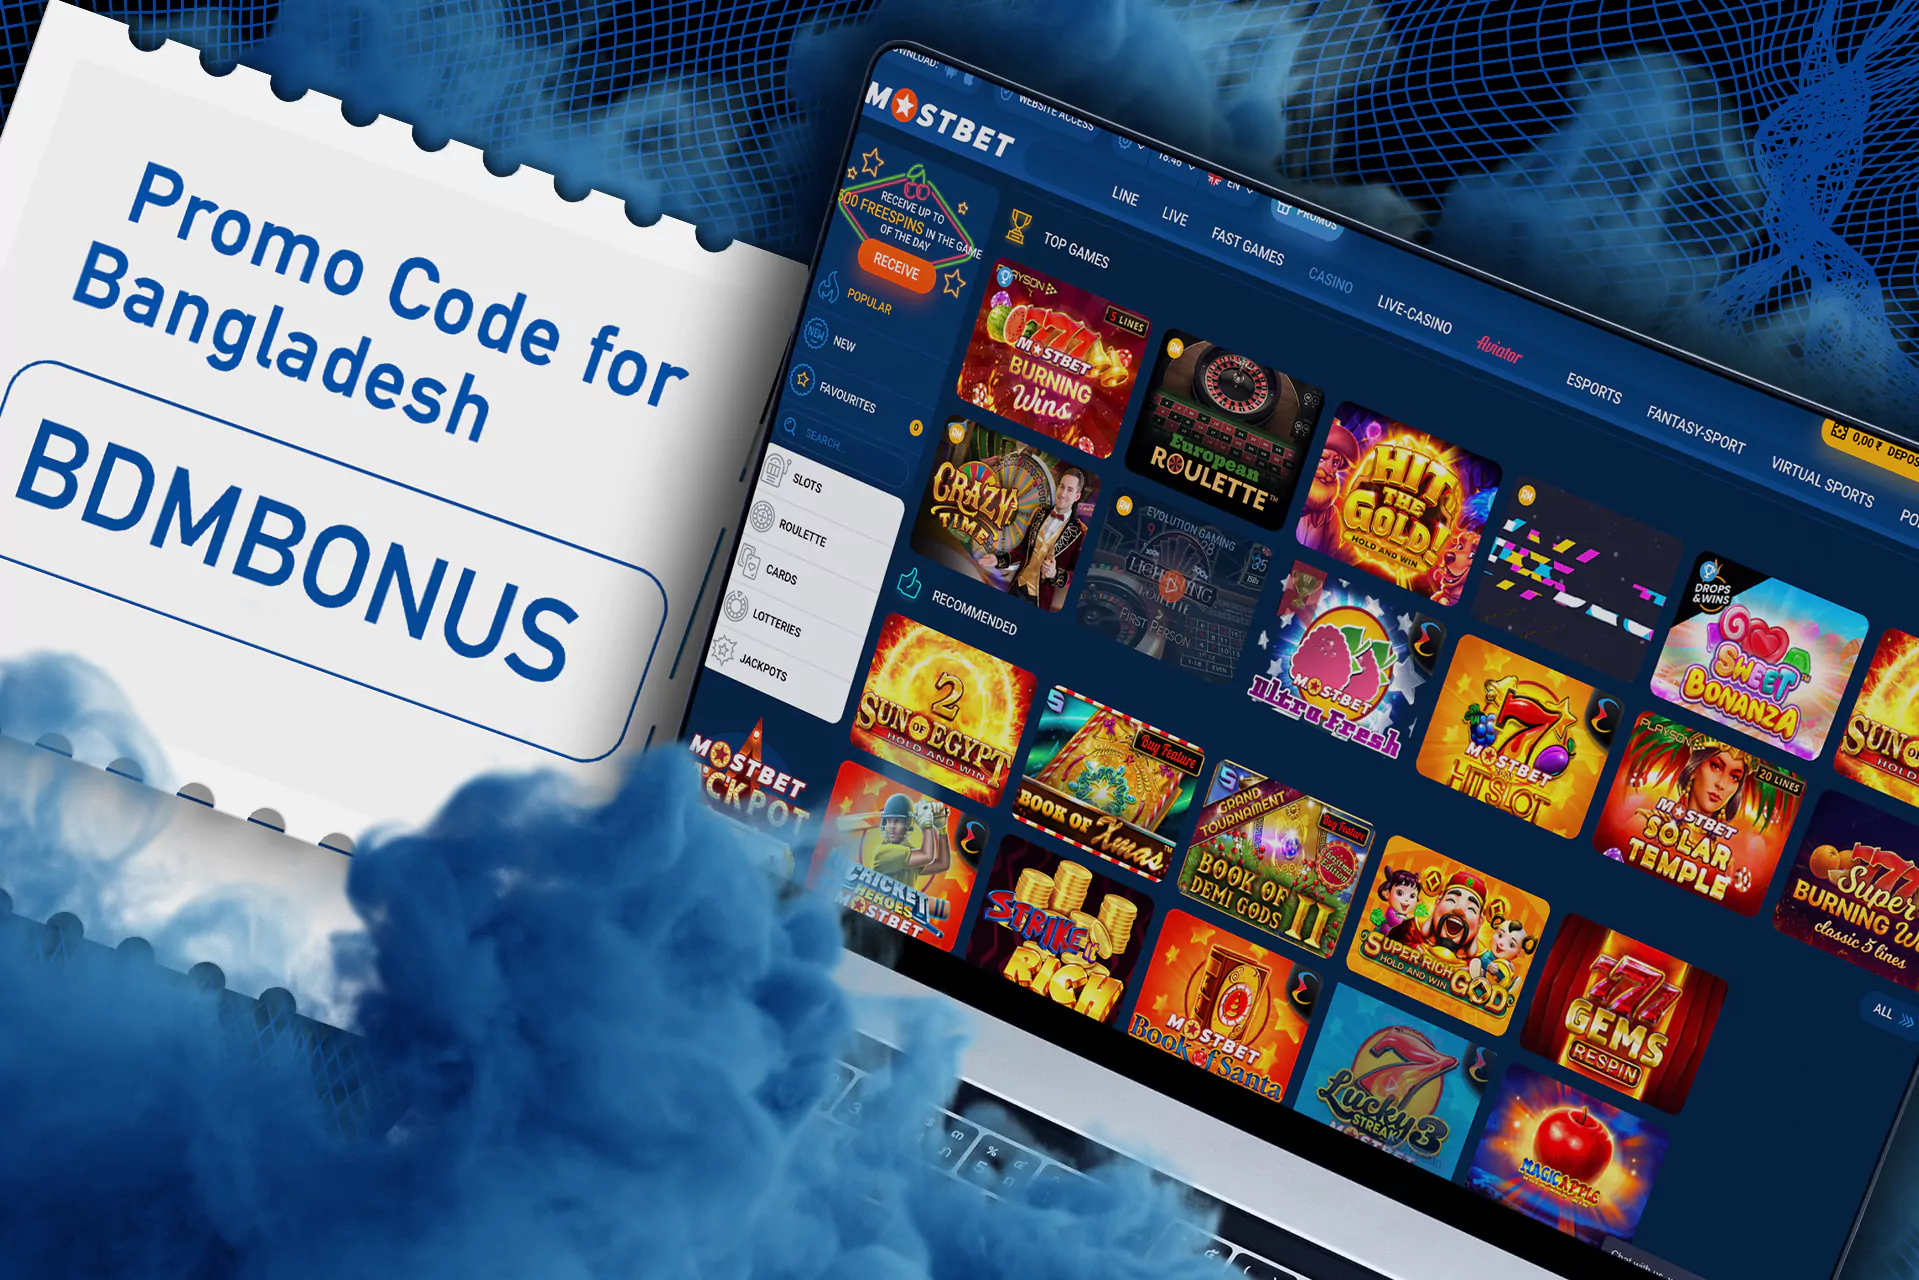 Use your promo code bonus for playing casino games.